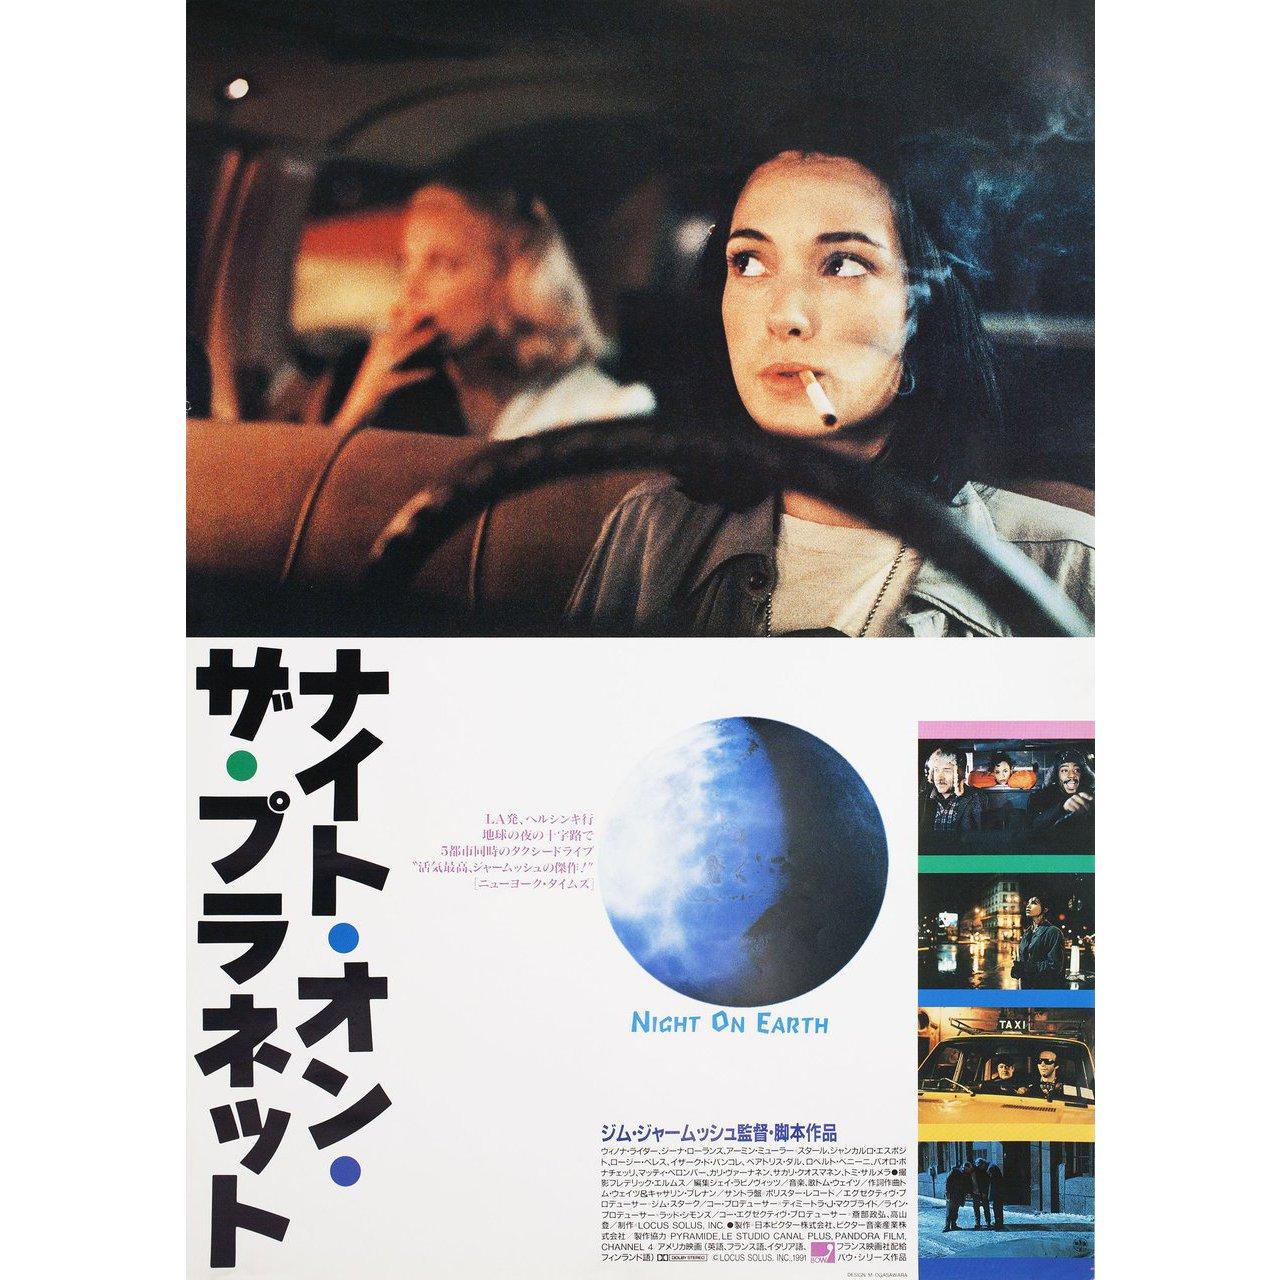 night on earth movie poster